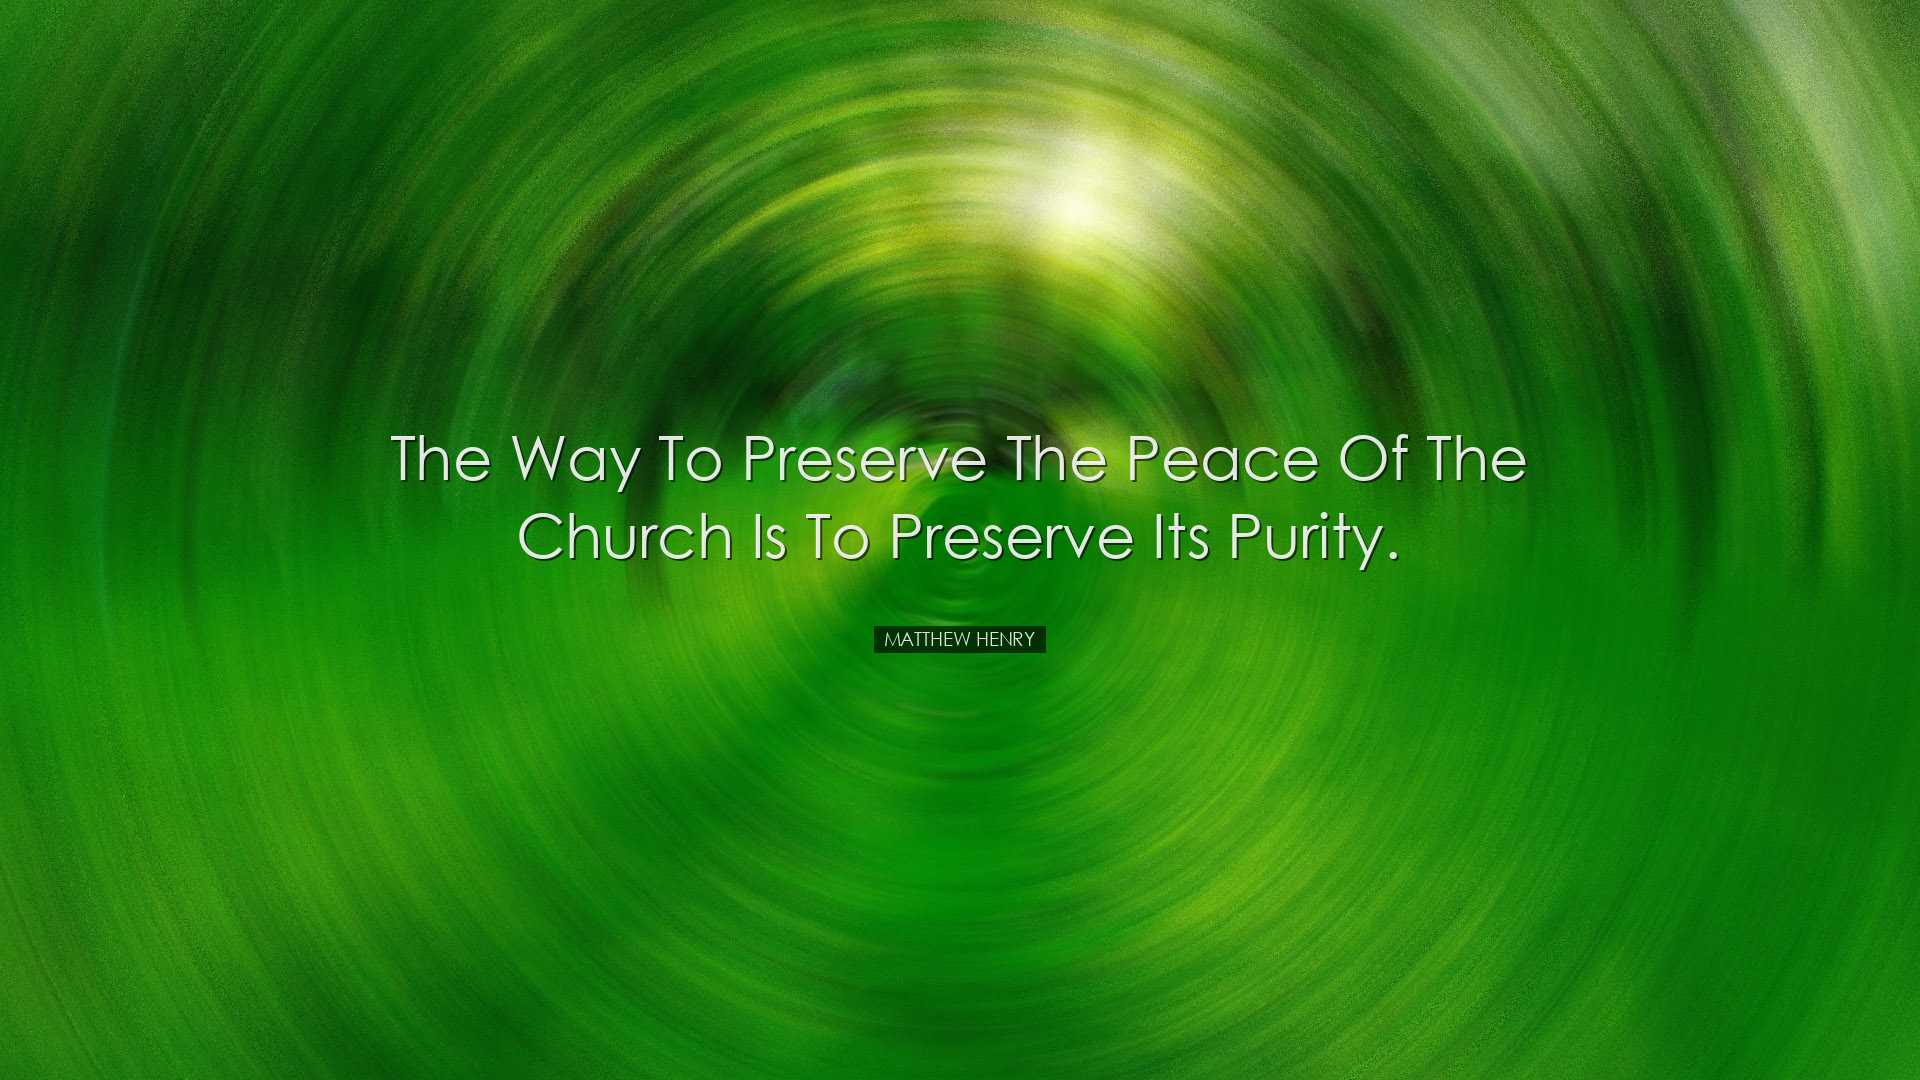 The way to preserve the peace of the church is to preserve its pur